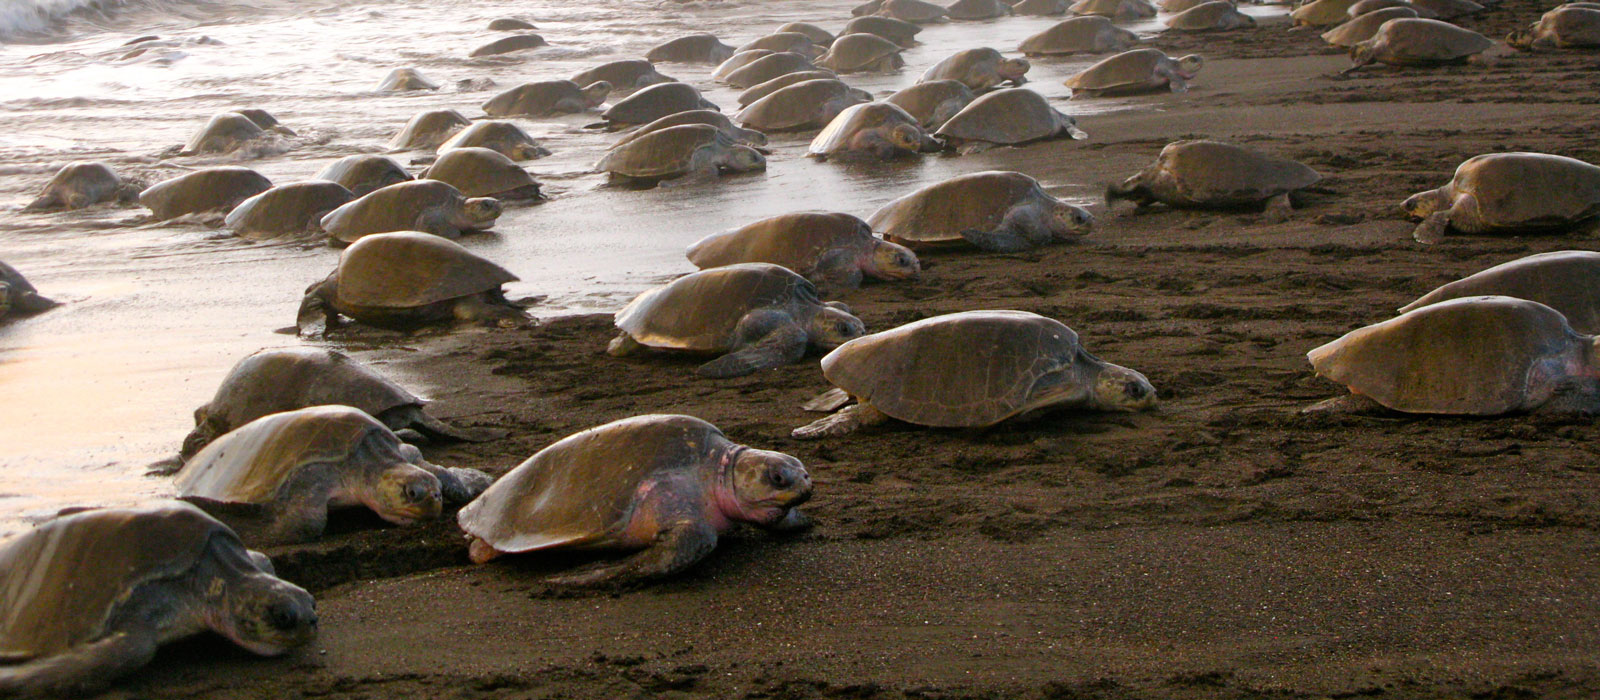 The olive ridley turtles